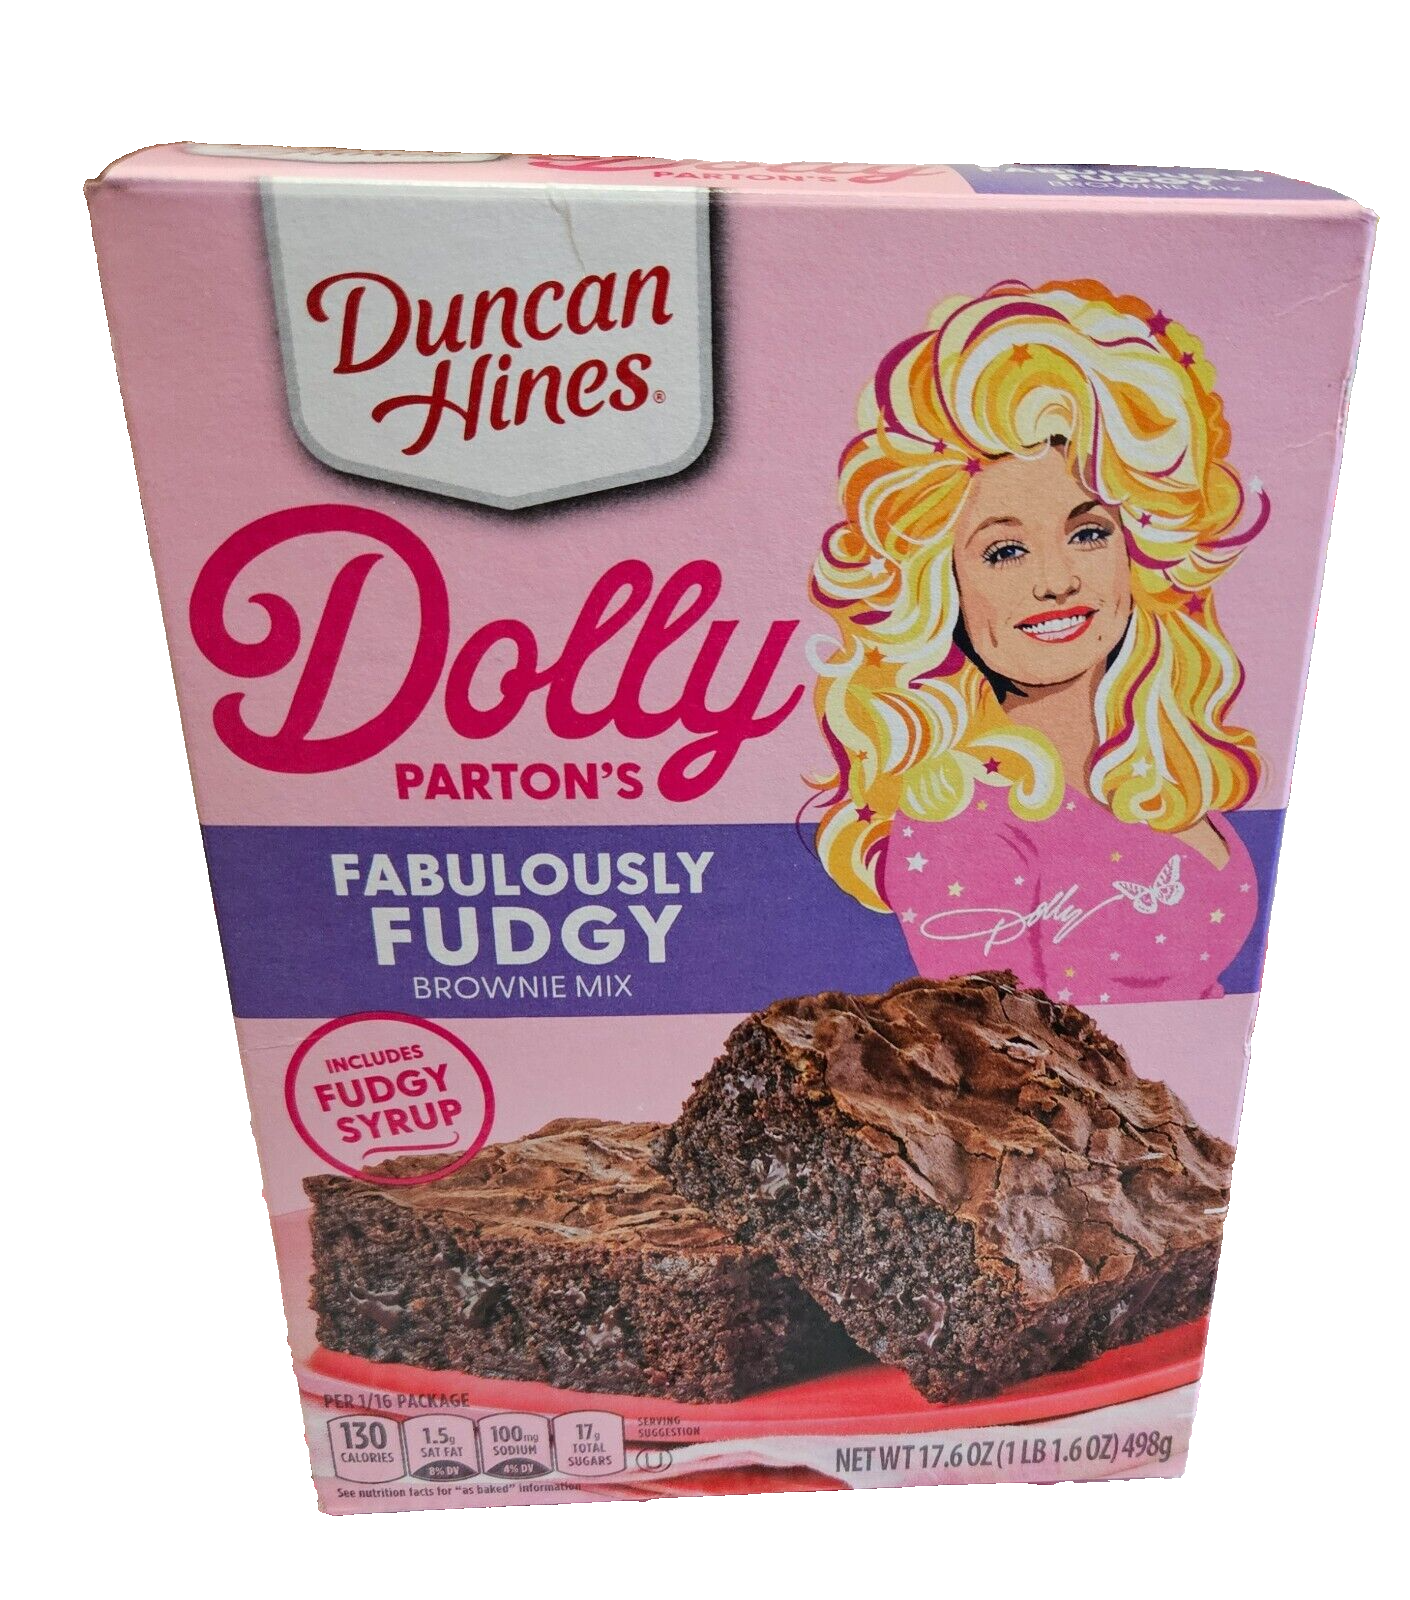 Dolly's Delight: Duncan Hines Fabulously Fudgy Brownie Mix with Rich Fudgy Syrup - $9.88